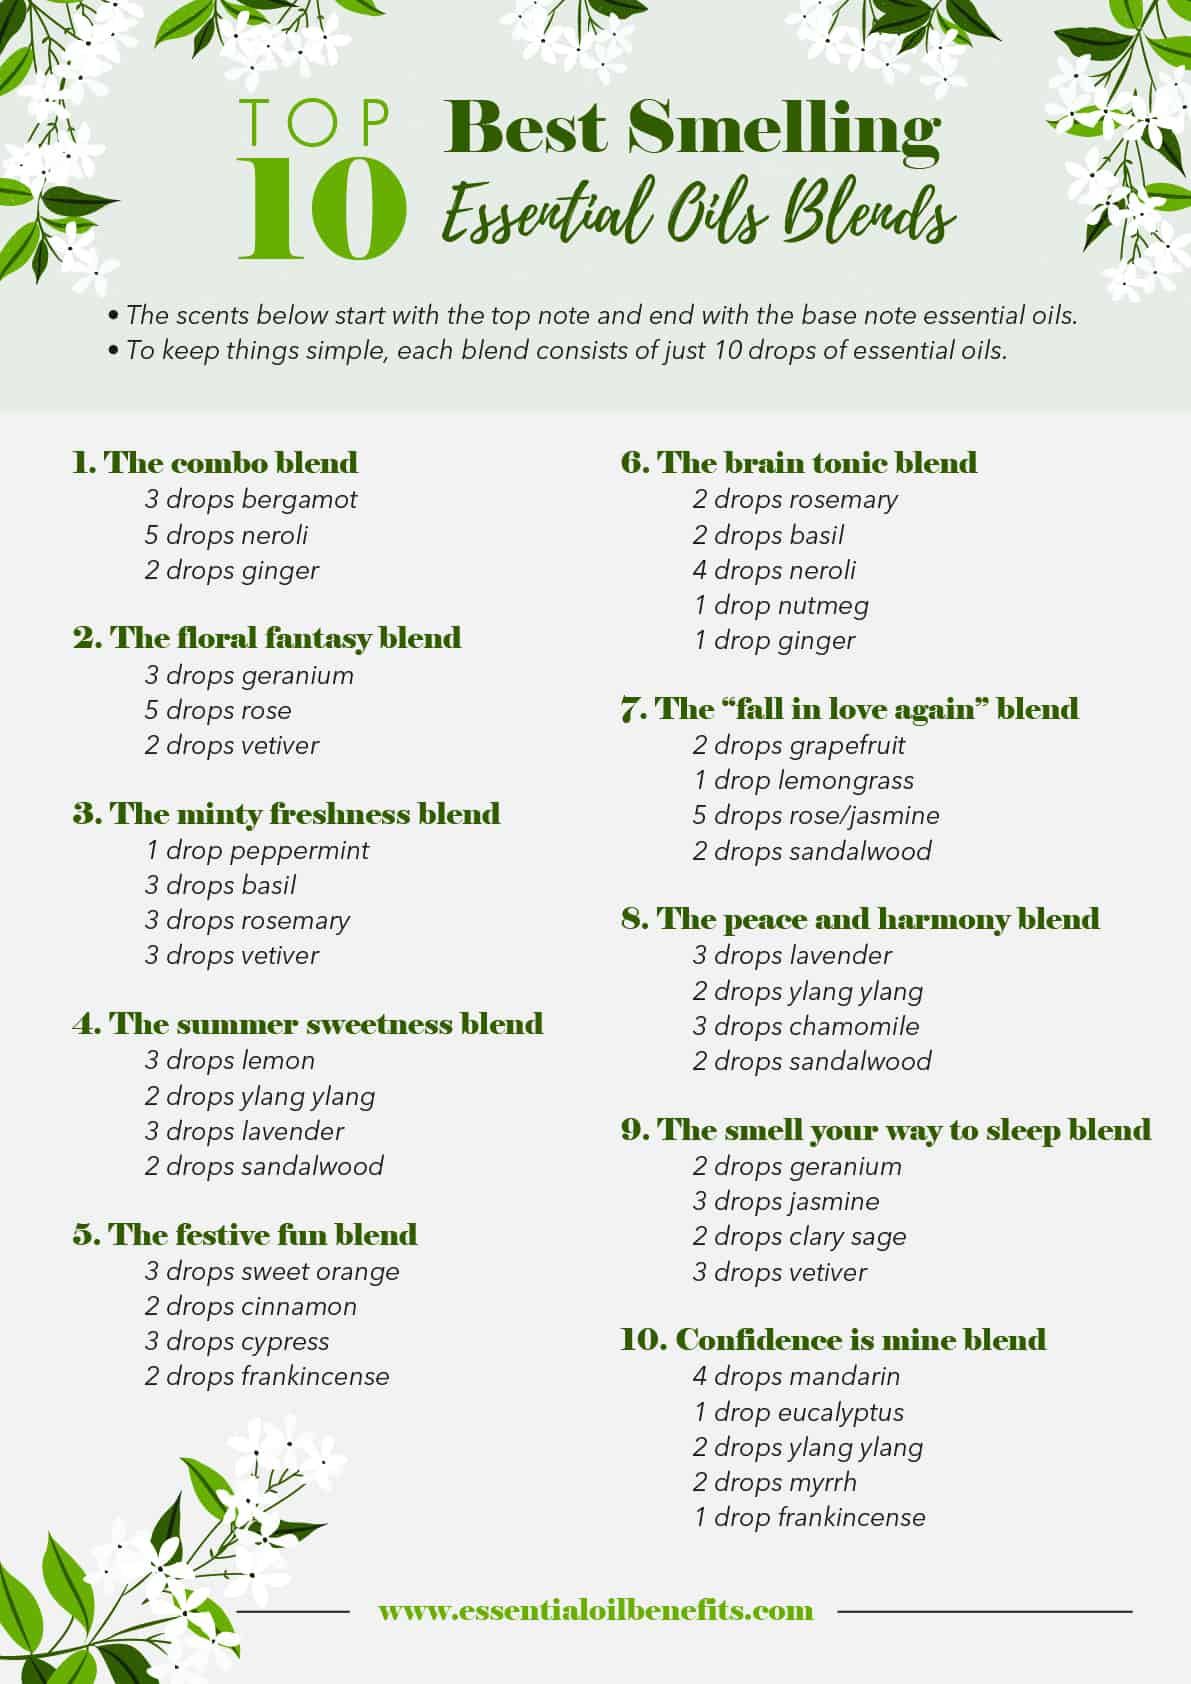 The Ultimate List of 30 Best Smelling Essential Oils! Essential Oil Benefits